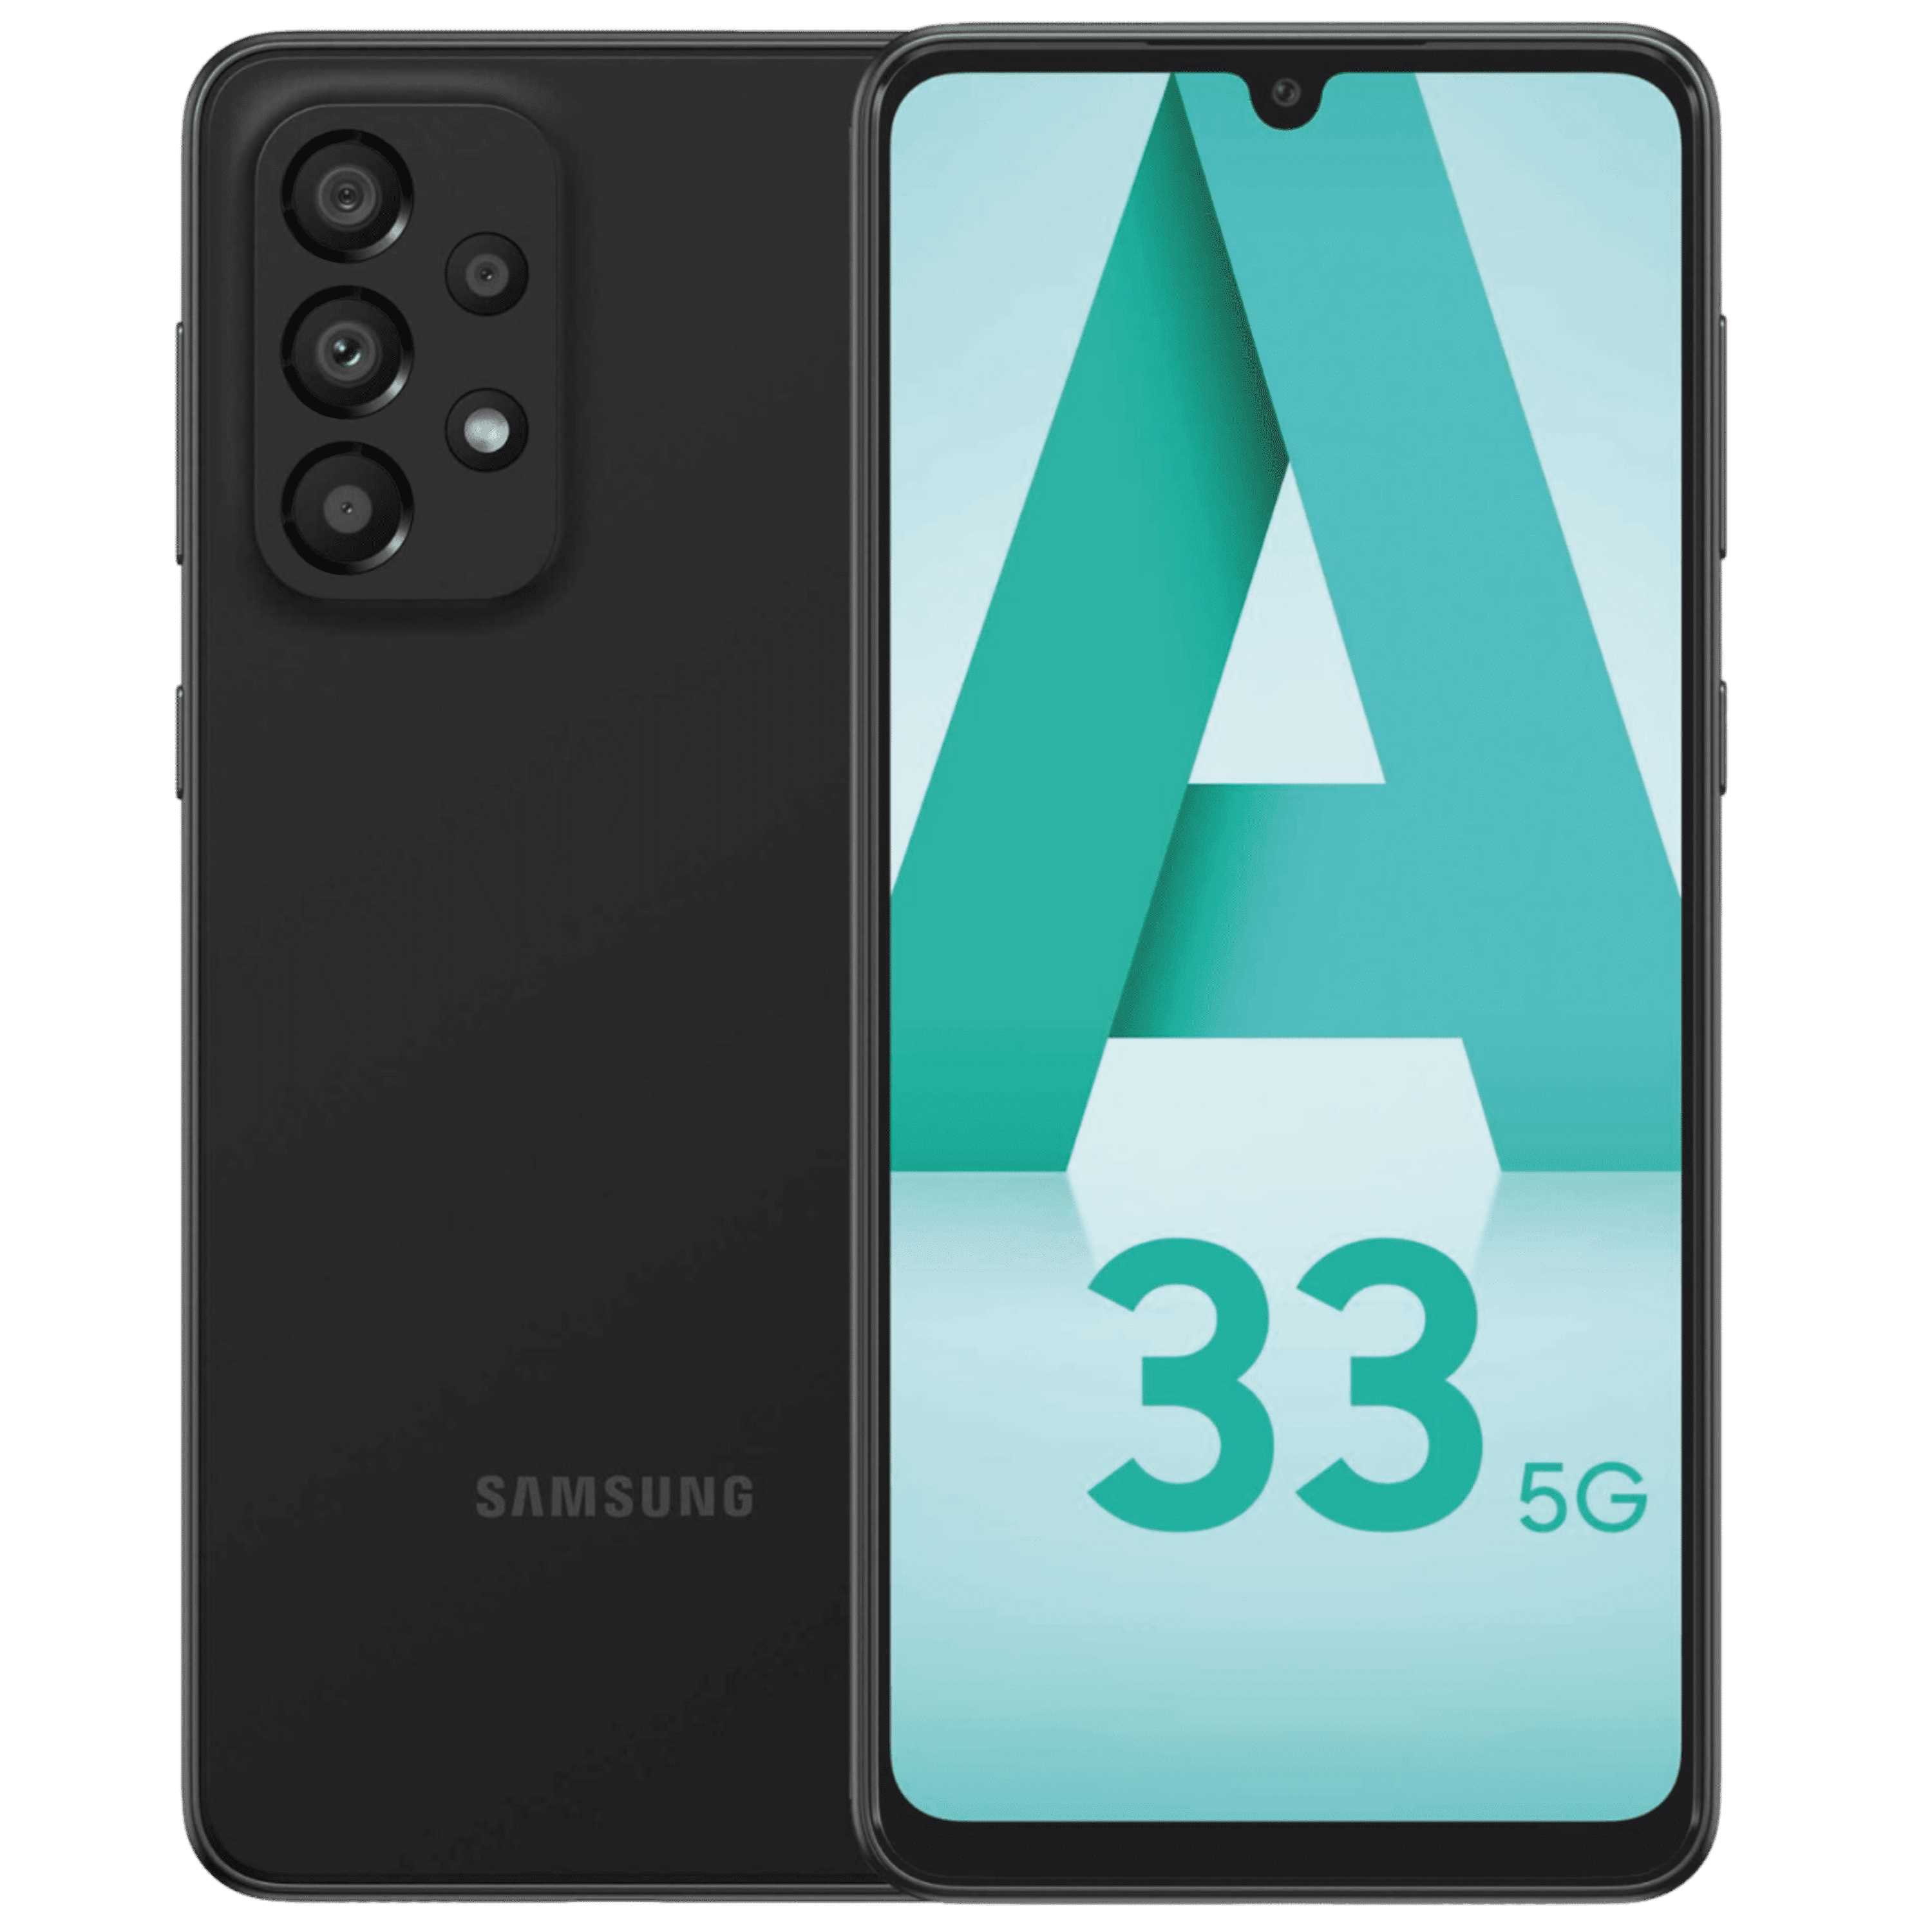 Samsung Galaxy A33 5G 128GB A336M Dual SIM GSM Unlocked Android Smartphone  (International, Latin America Variant/US Compatible LTE) - Awesome Black